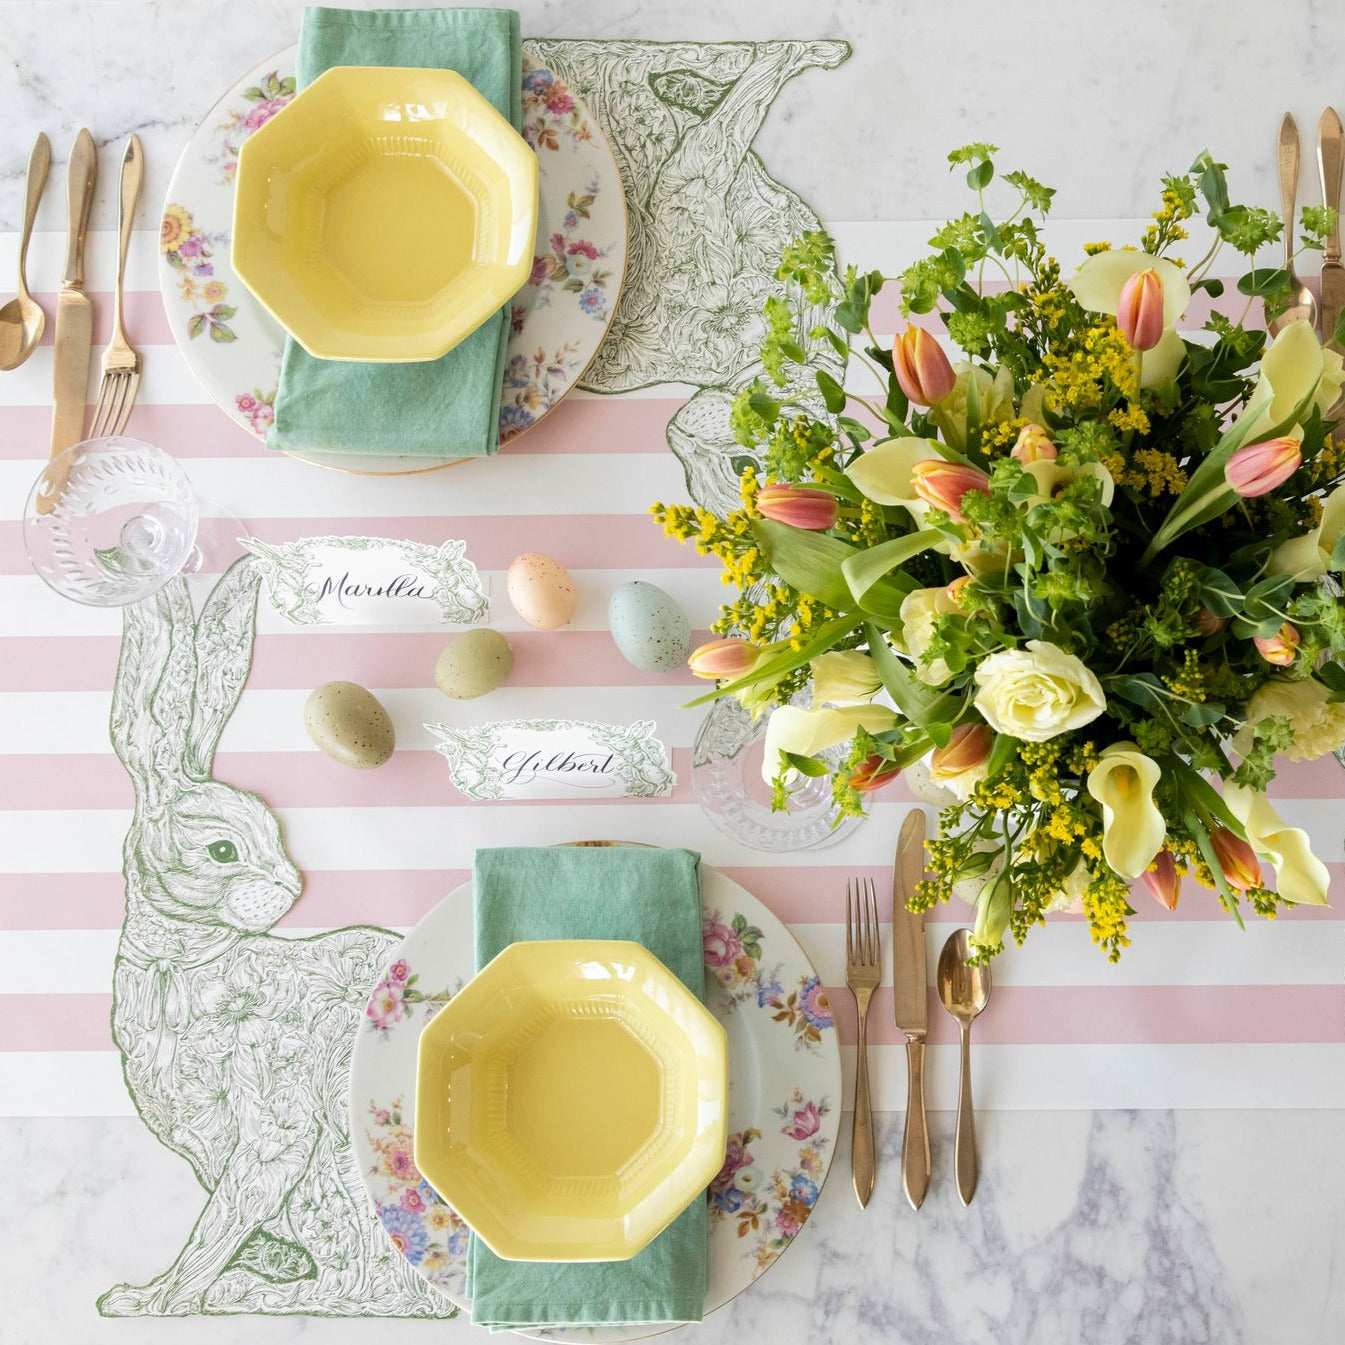 The Die-cut Greenhouse Hare Placemat under an elegant Easter table setting for two, from above.